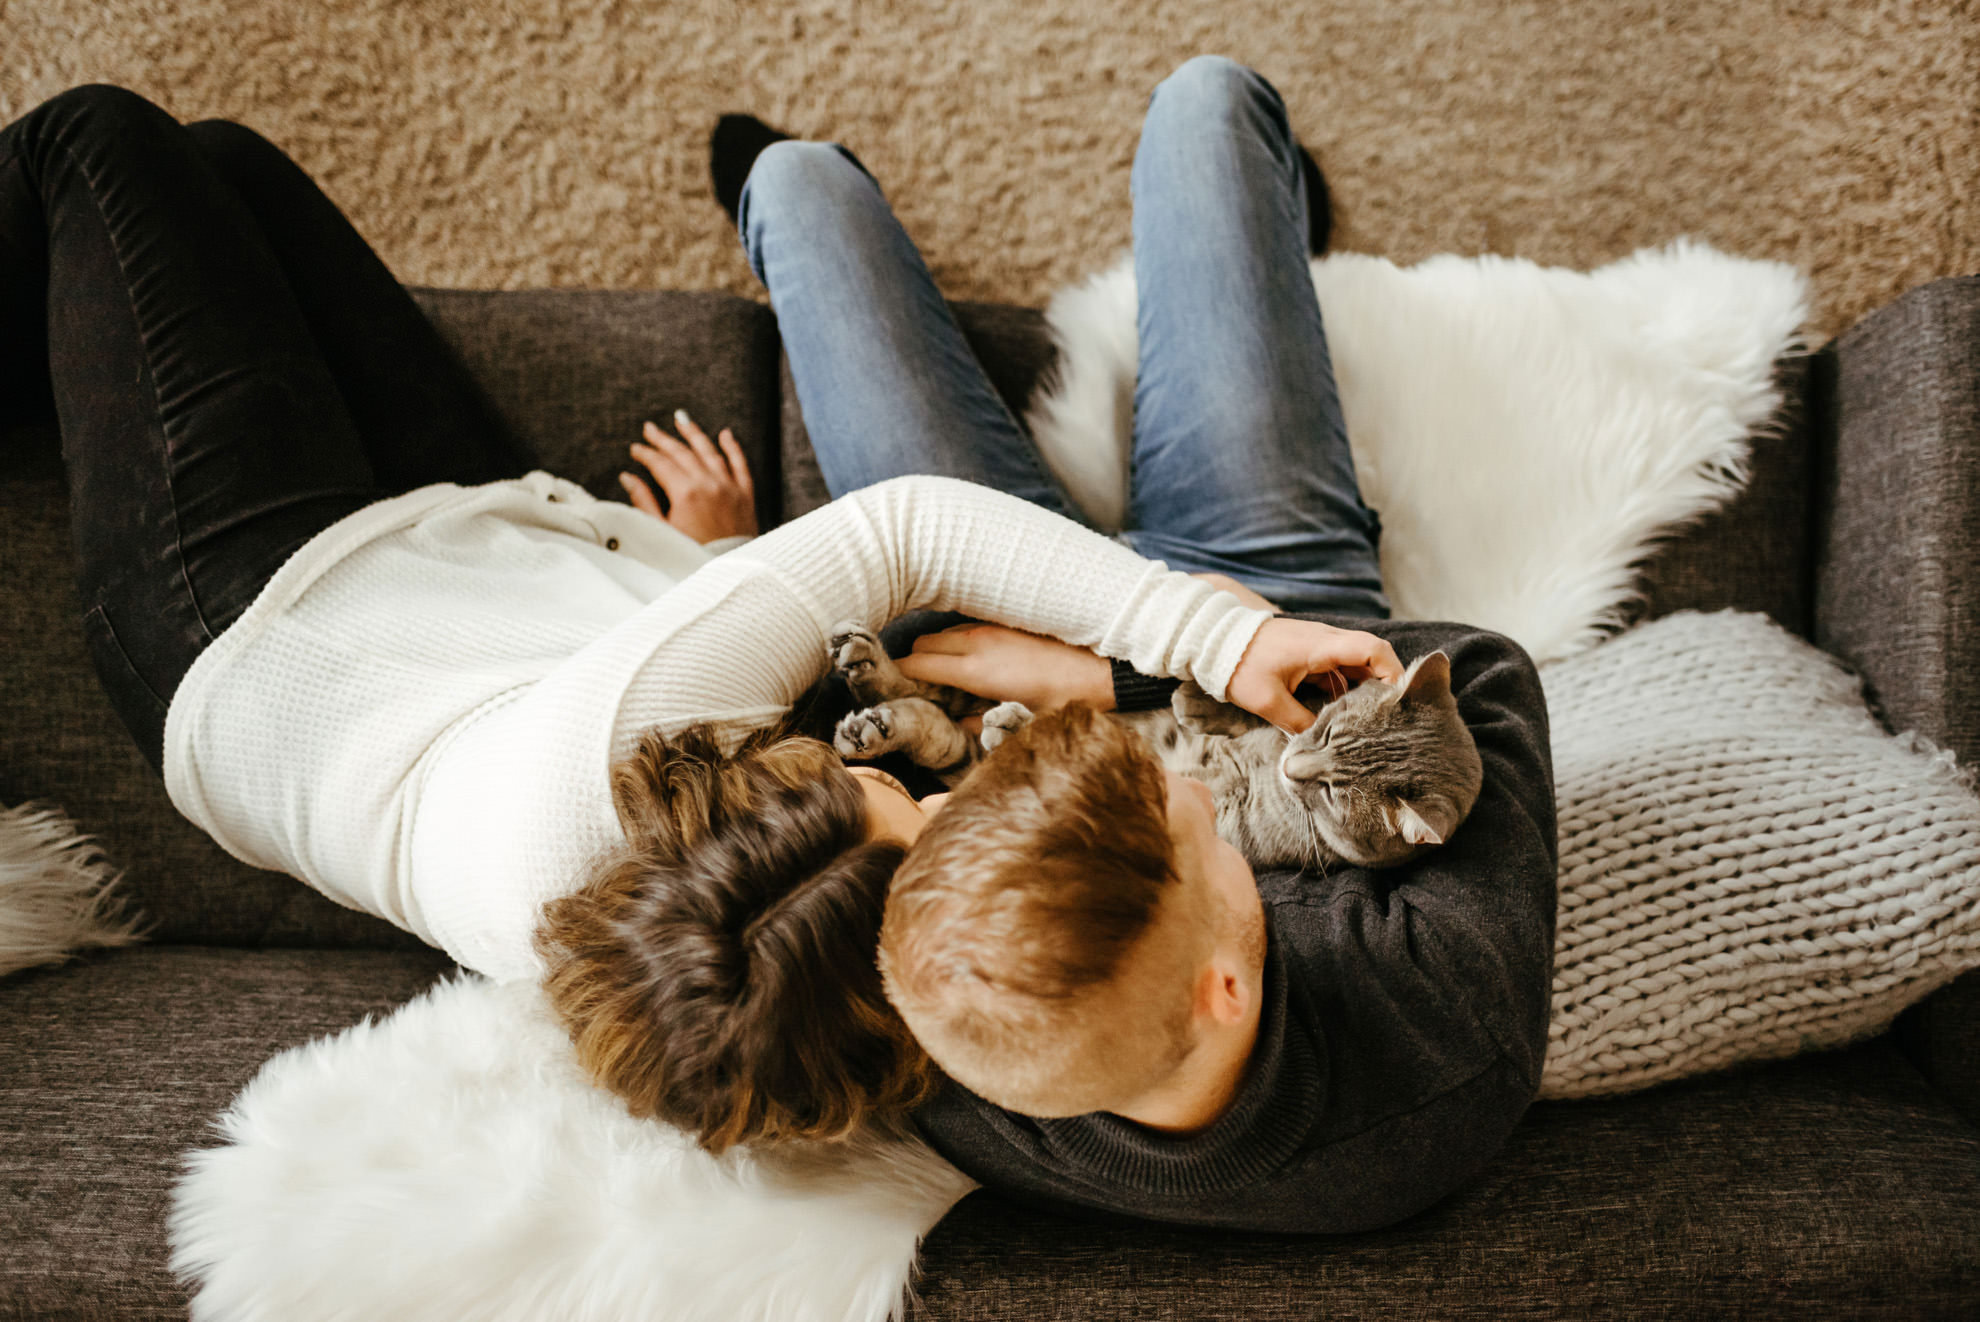 couple cuddling with cat on couch from above